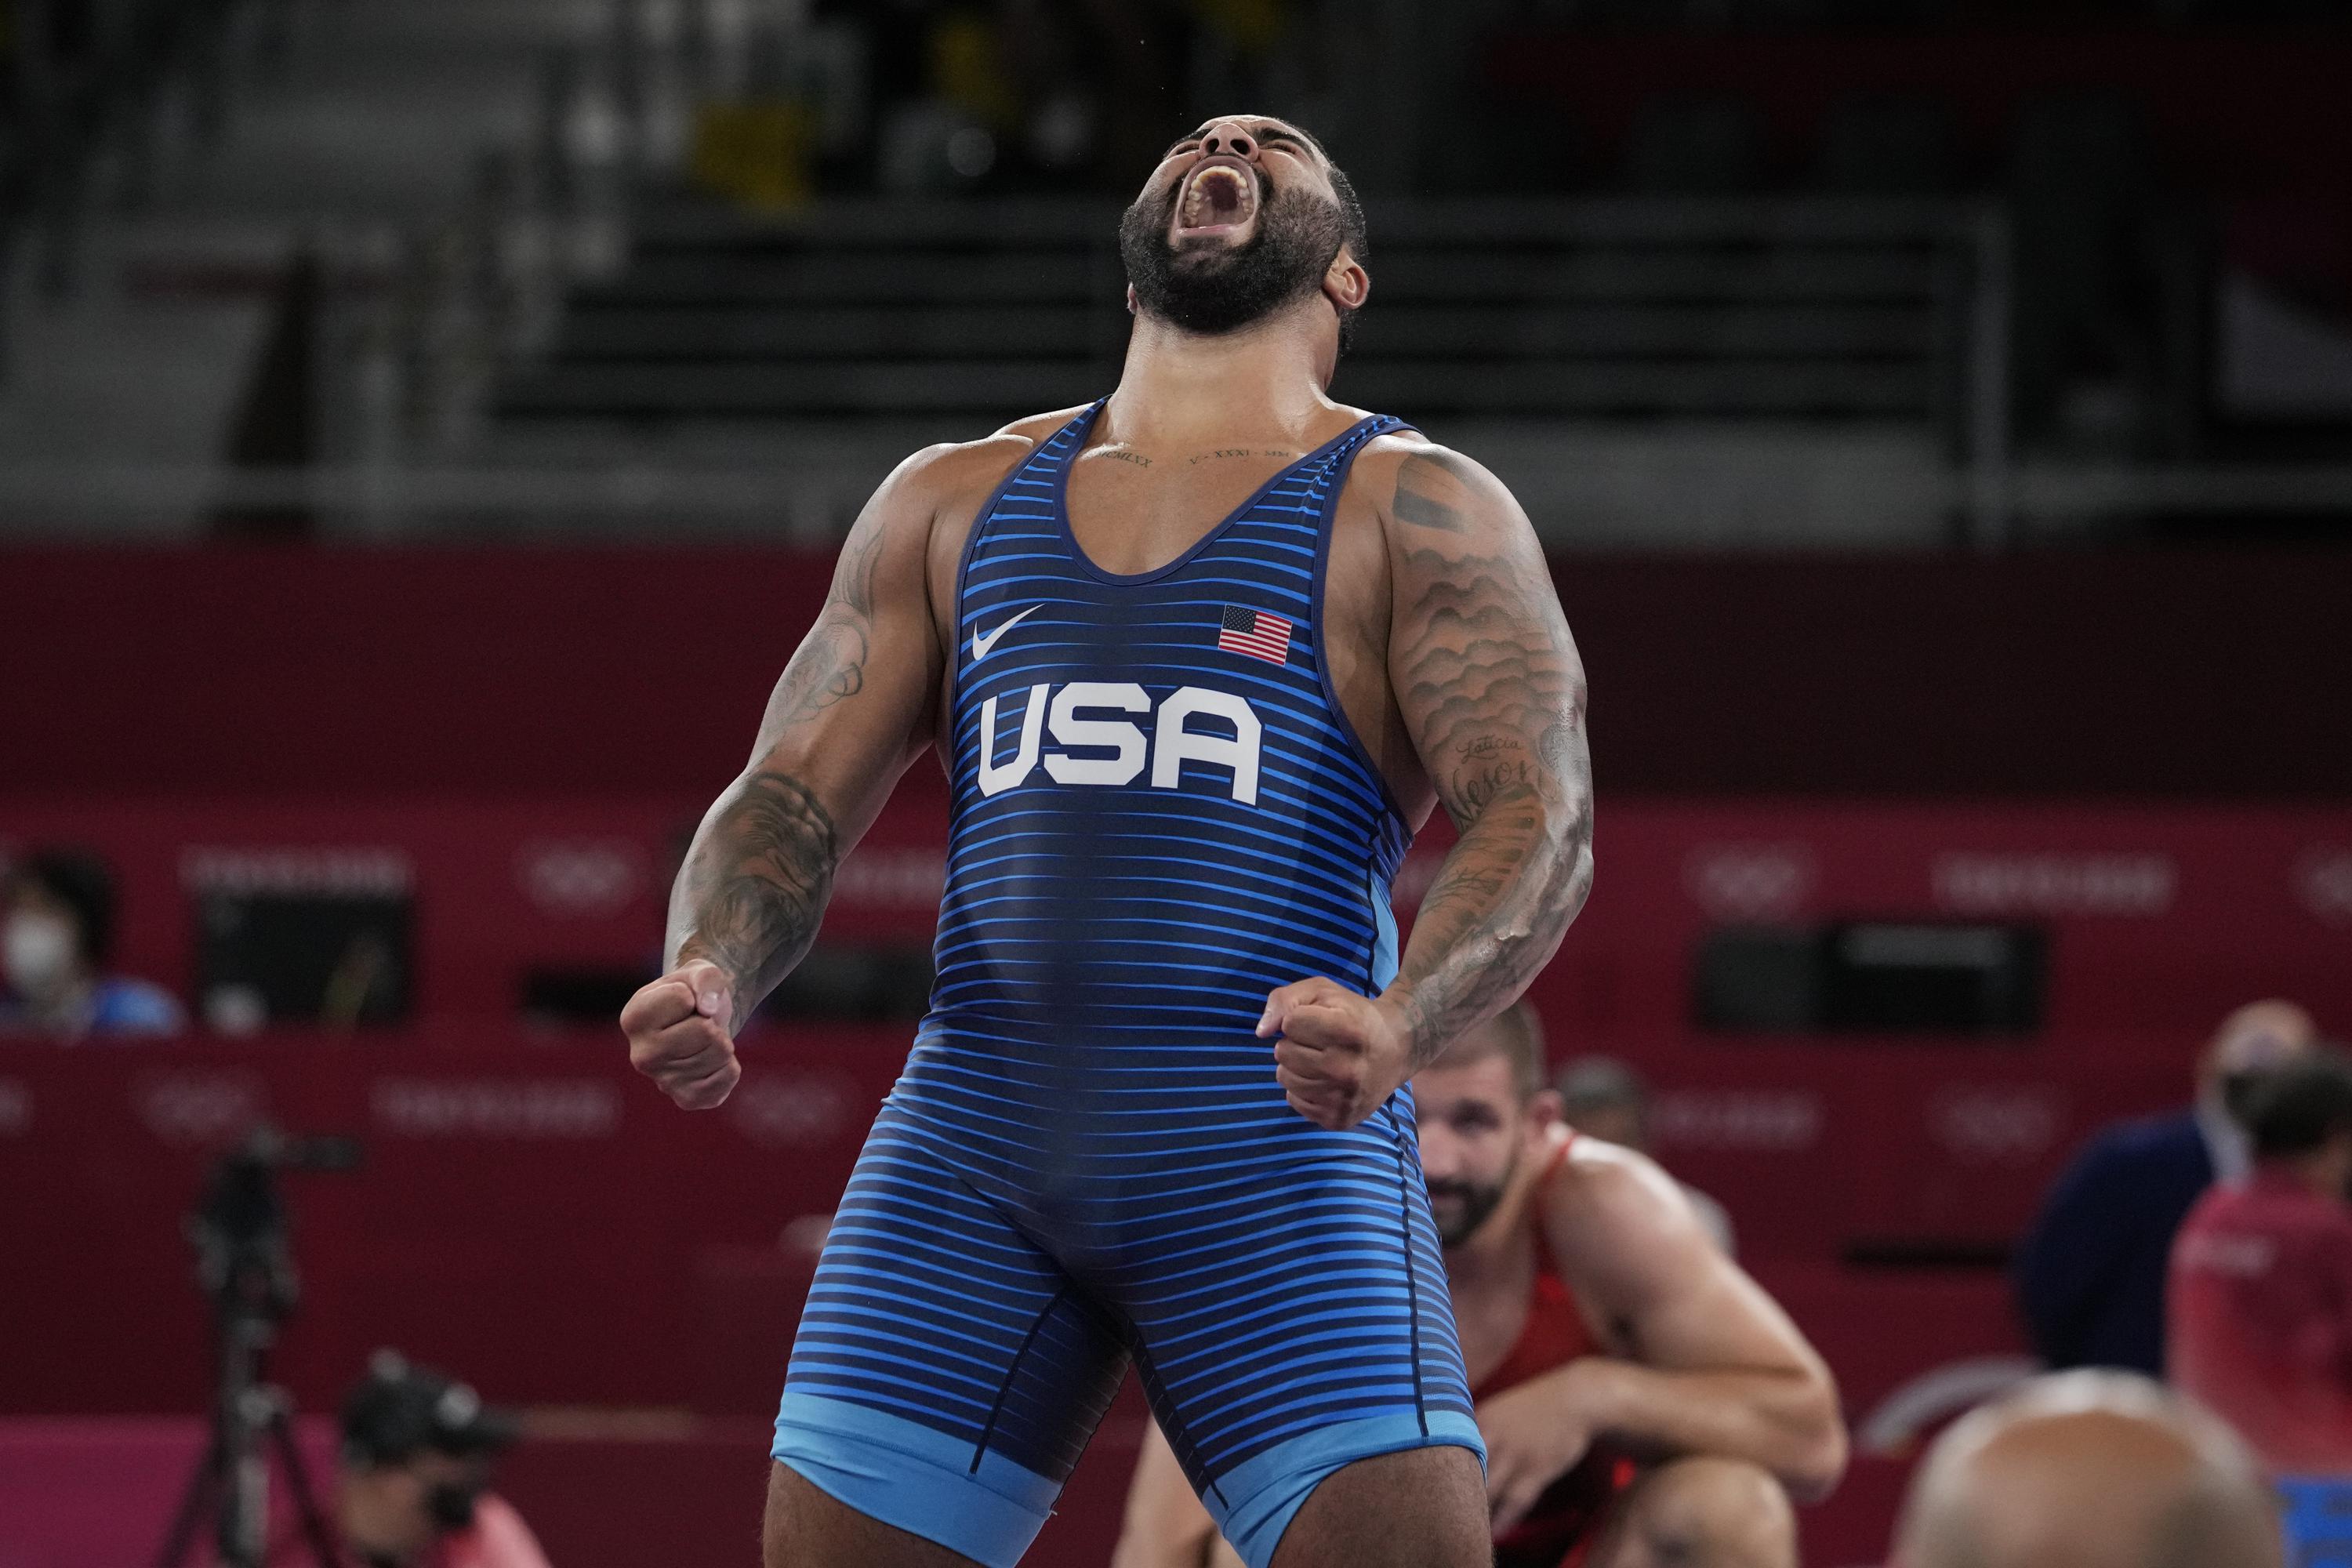 USA's Steveson scores late to win wrestling gold AP News